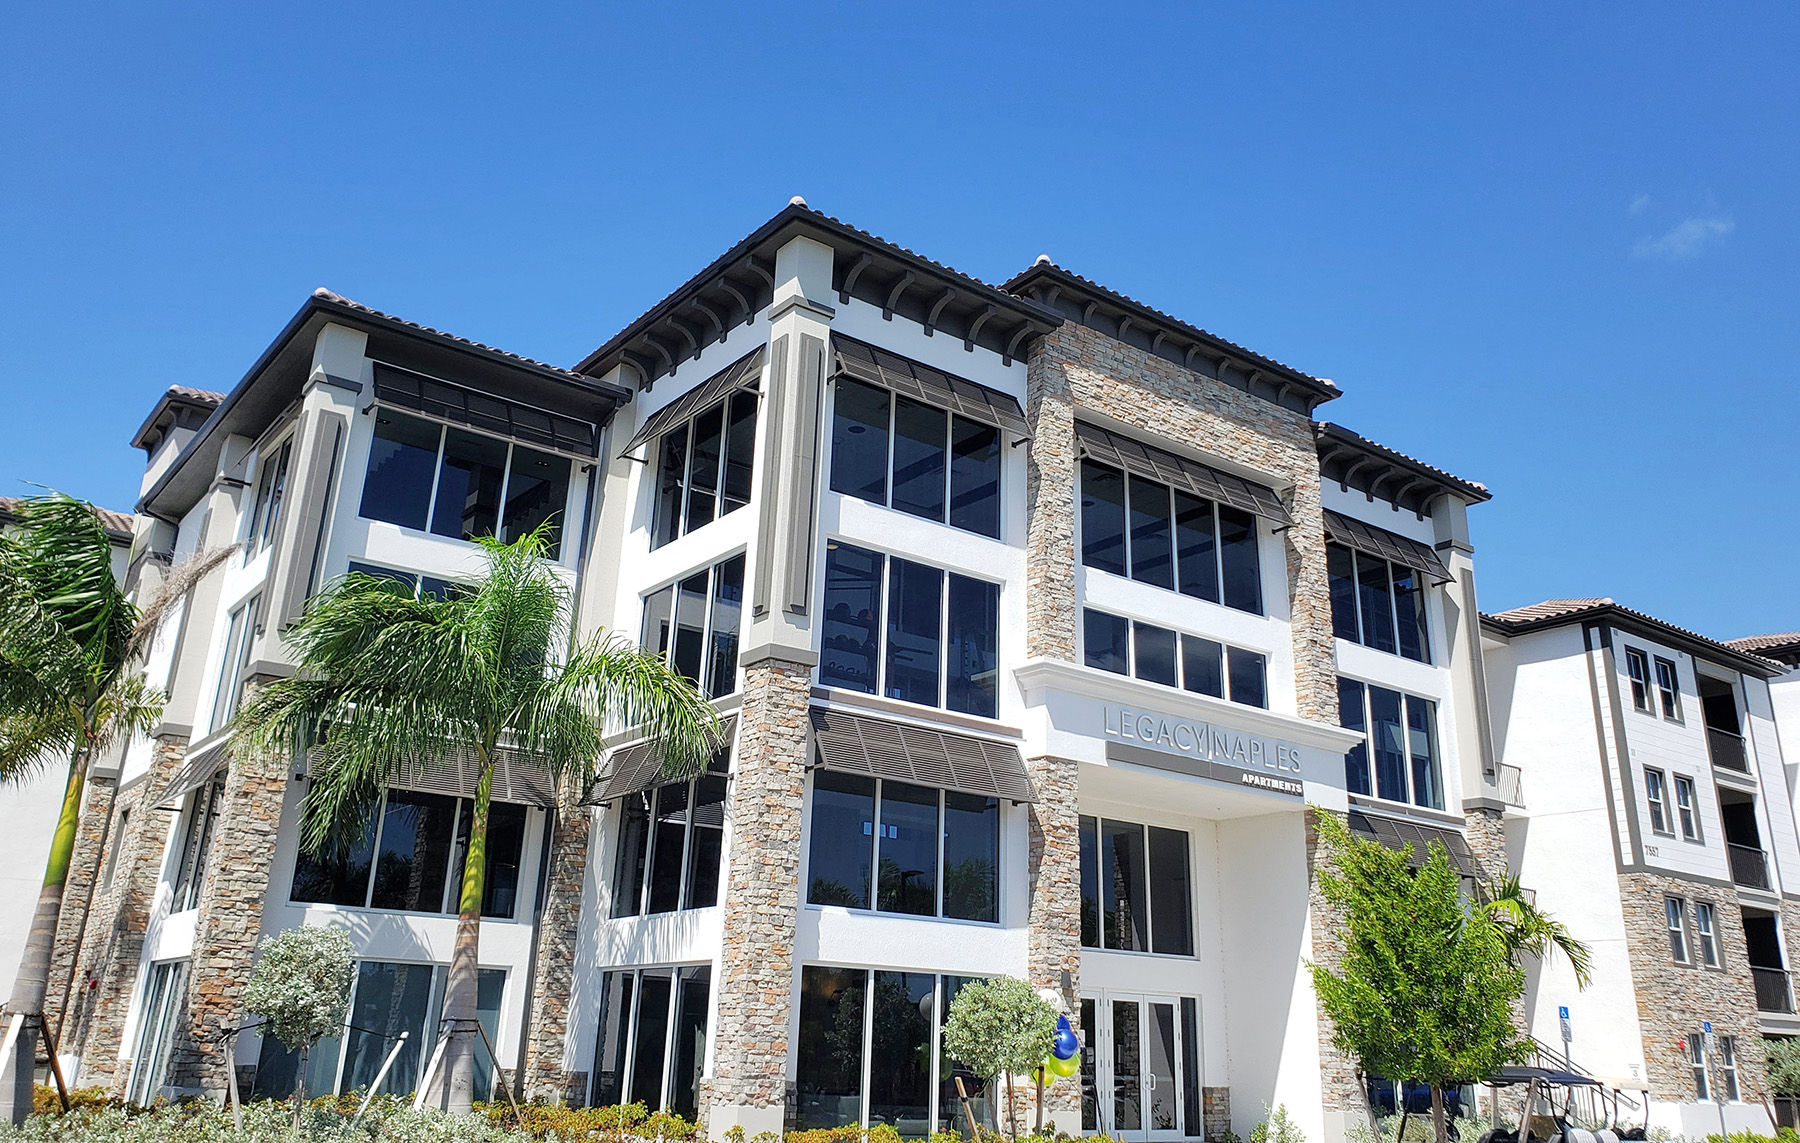 Finding a durable solution: Aquifers common in Florida meant the Naples construction site needed a reliable waterproofing solution. The PENETRON ADMIX-treated concrete mix was an effective solution.